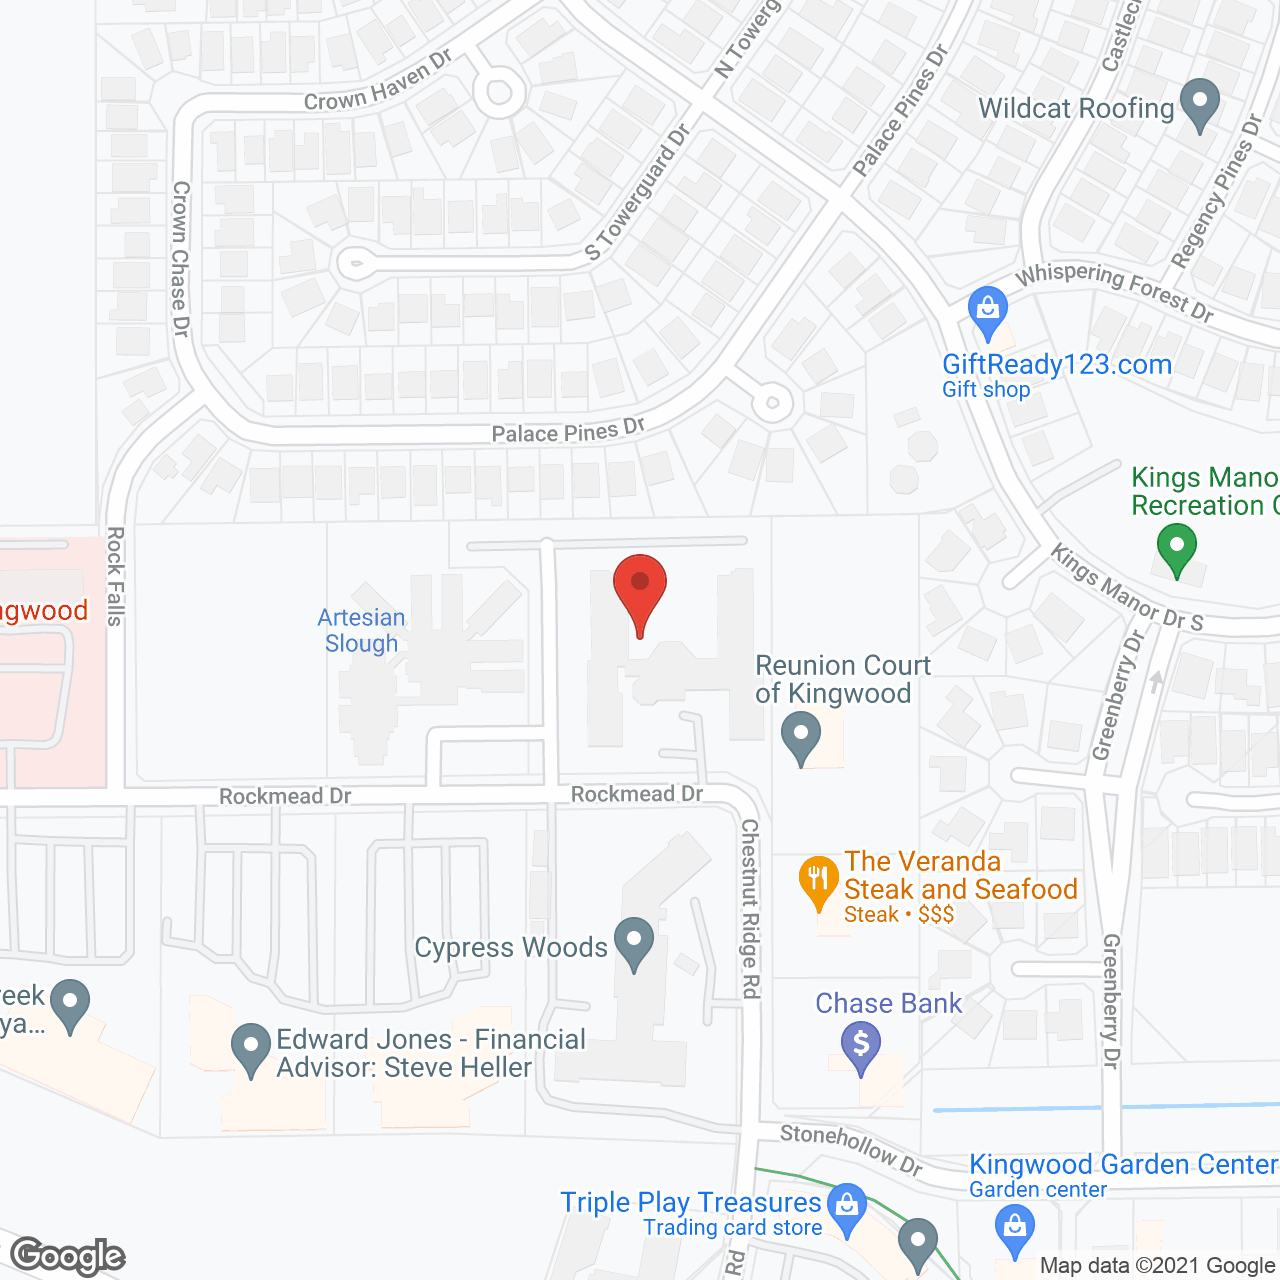 Reunion Court of Kingwood in google map